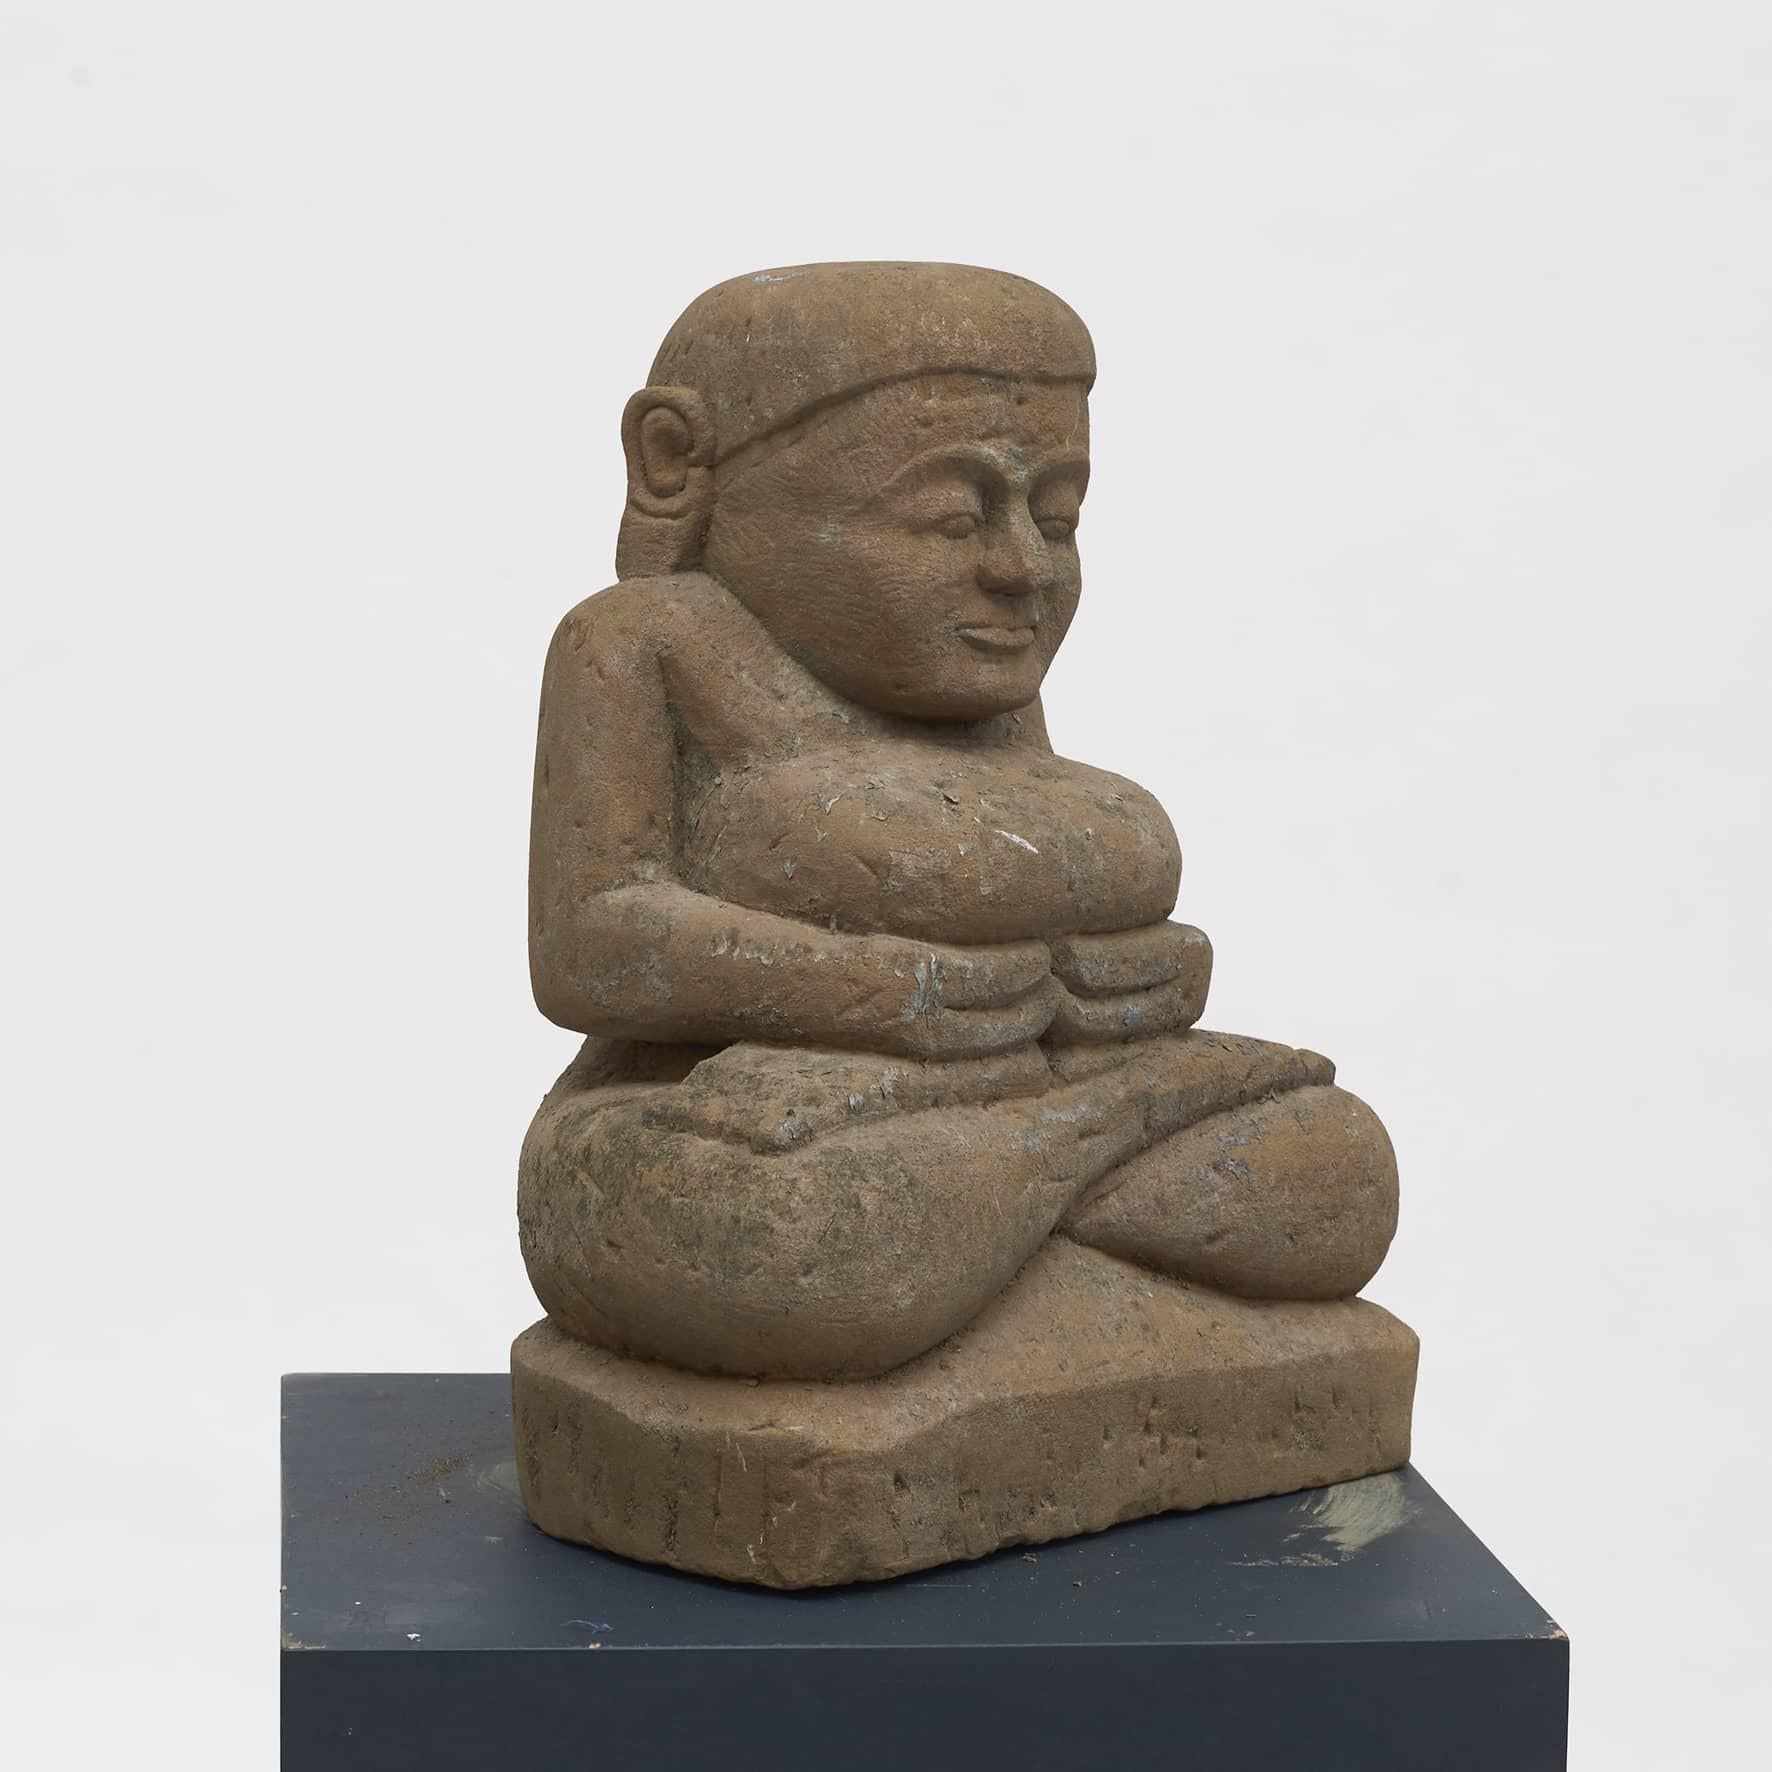 Burmese carved sandstone Buddha sculpture.
Seated in dhyanasana with legs in virasana, the half lotus position, hands in dhyana mudra, the gesture of meditation.

Originates from pagoda / temple in Arakan, a coastal geographic region in southern